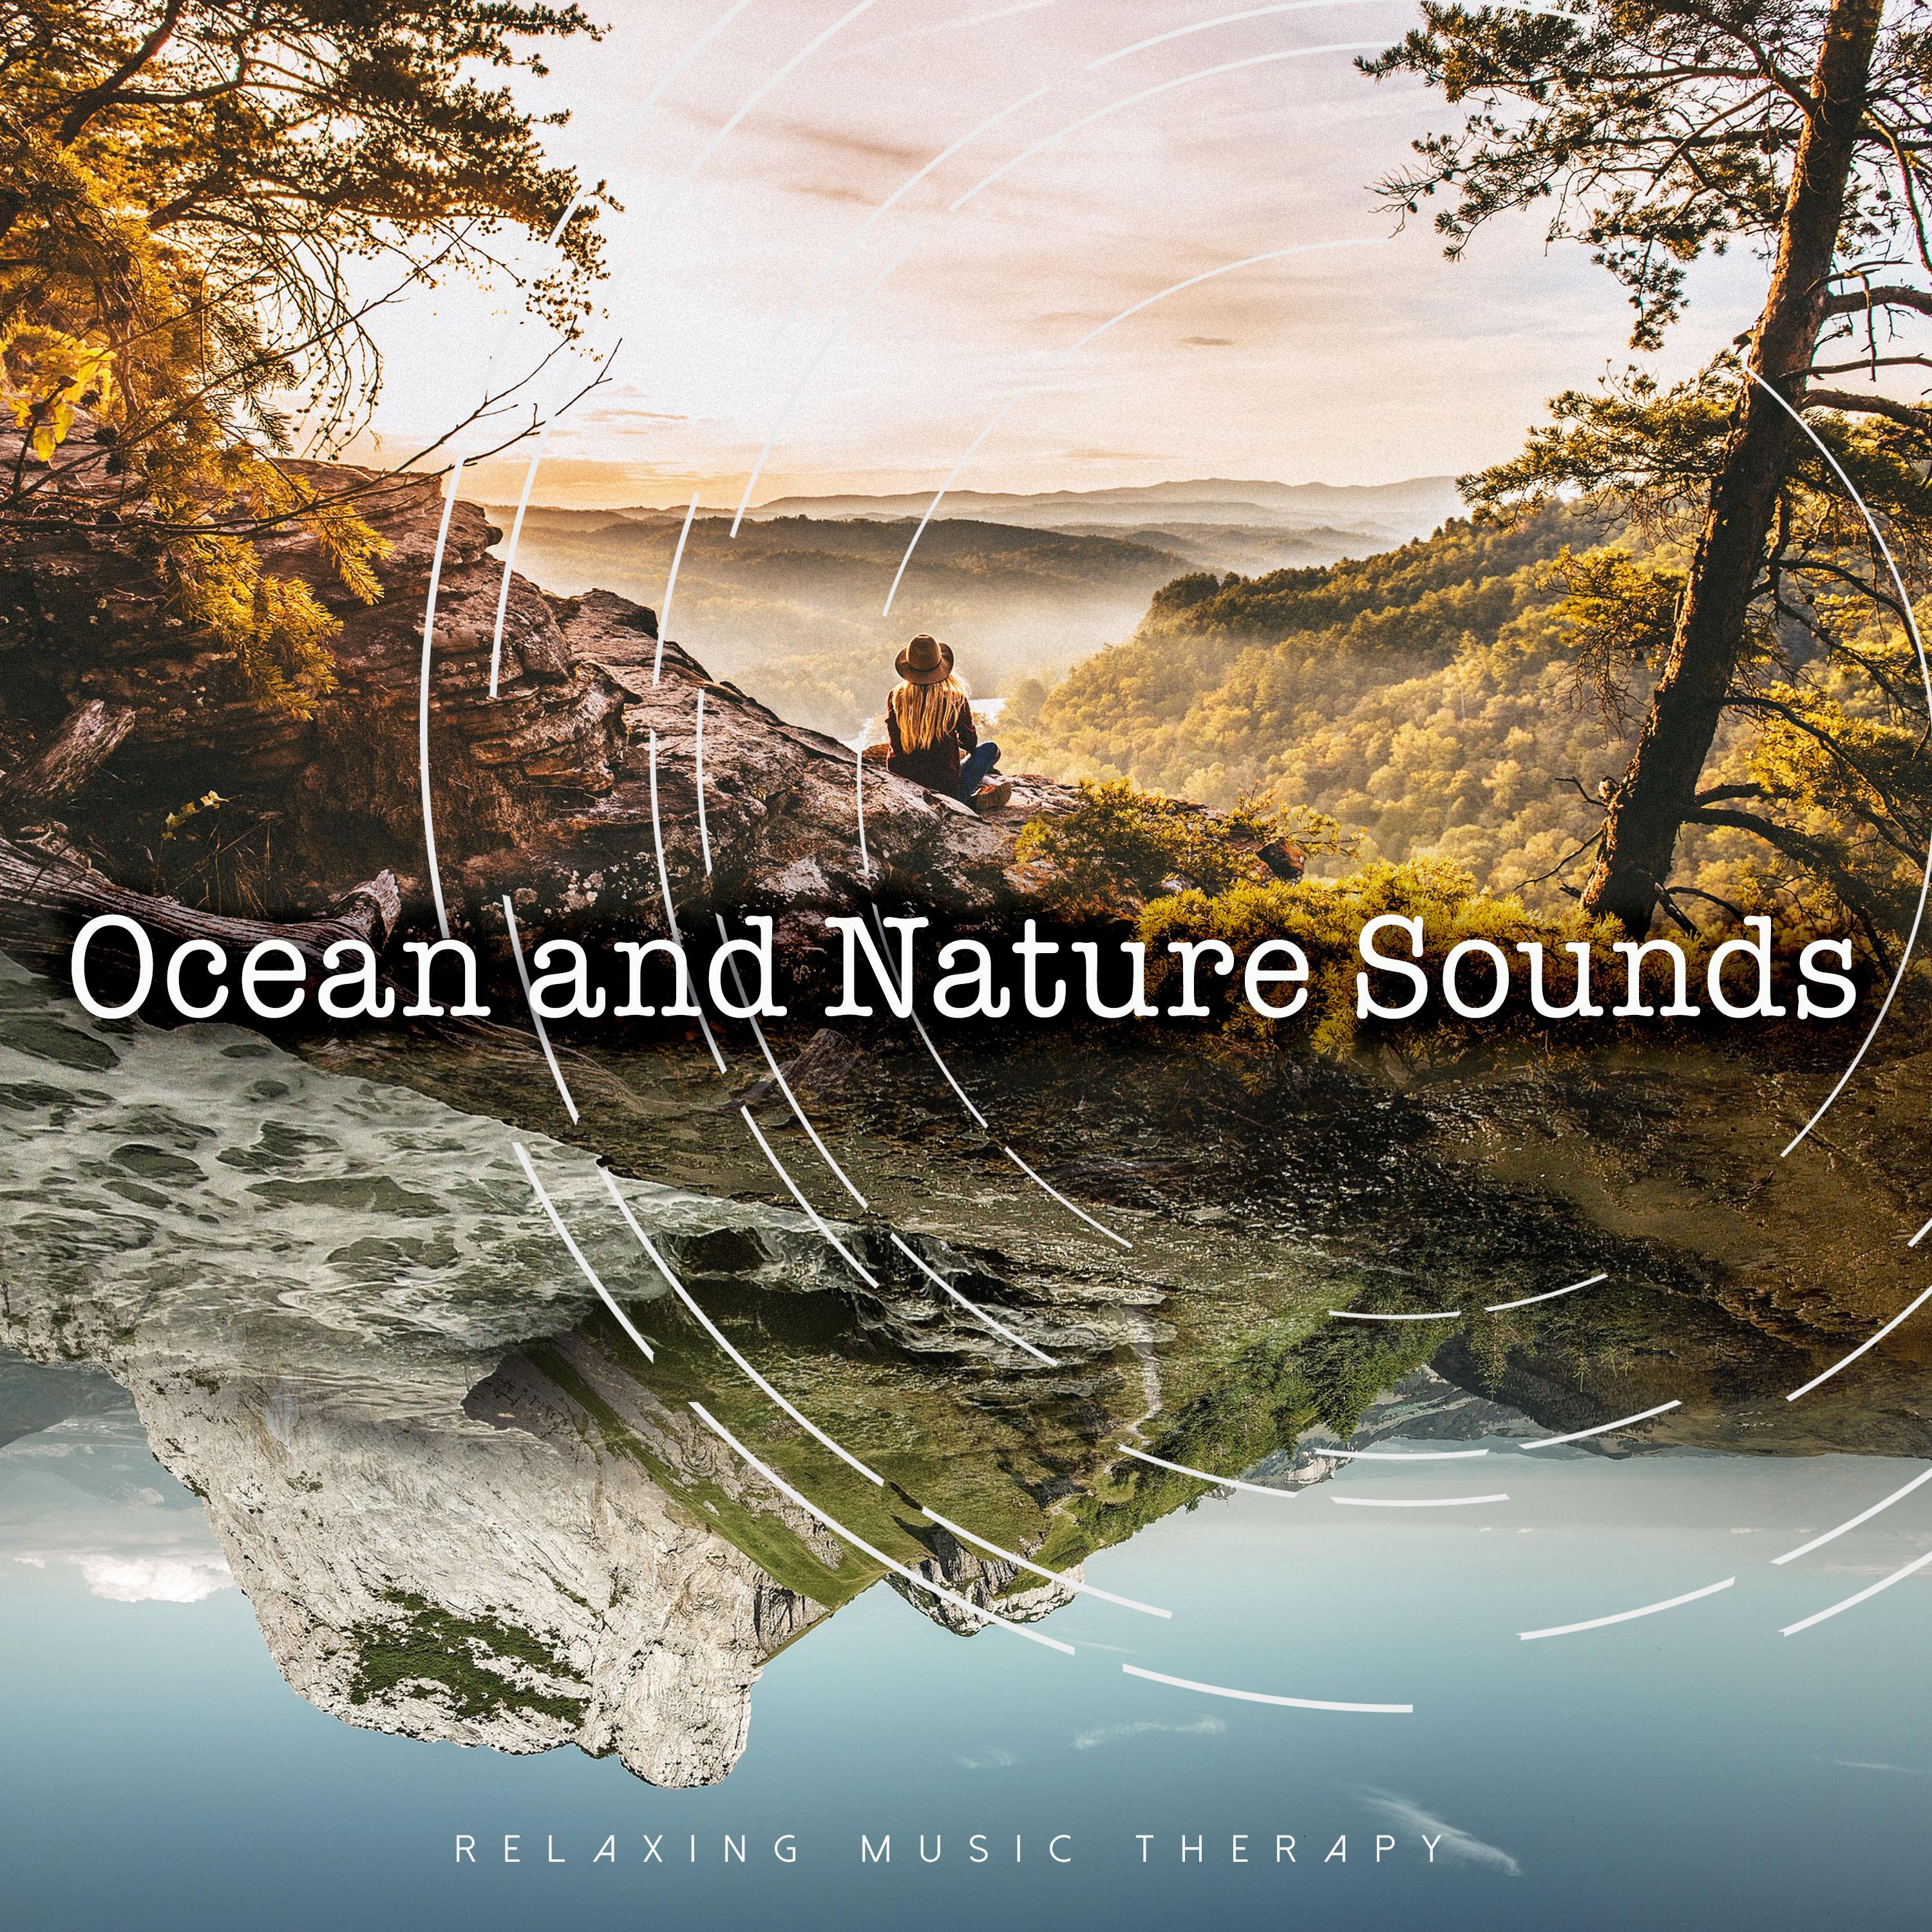 Ocean and Nature Sounds